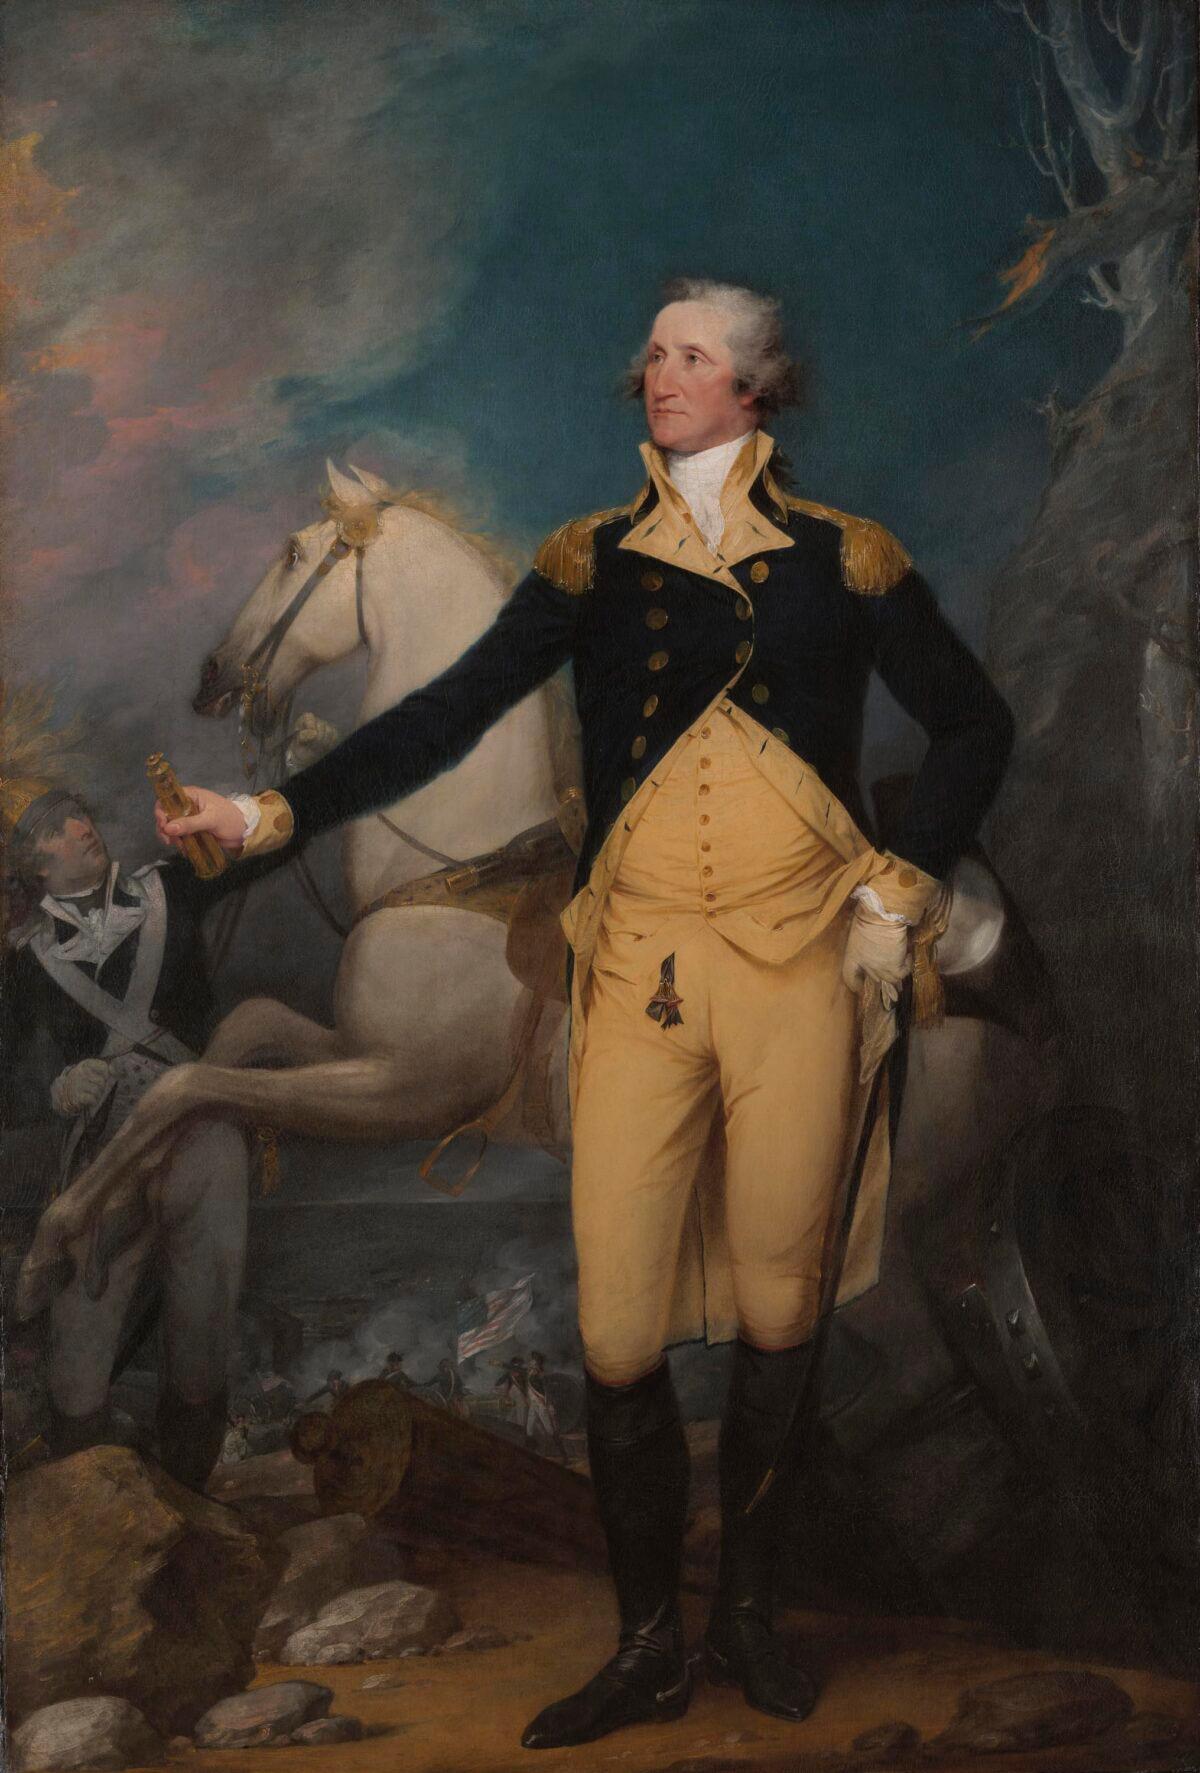 “General George Washington at Trenton,” 1792, by John Trumbull. Gift of the Society of the Cincinnati in Connecticut, Yale University Art Gallery. (Public Domain)